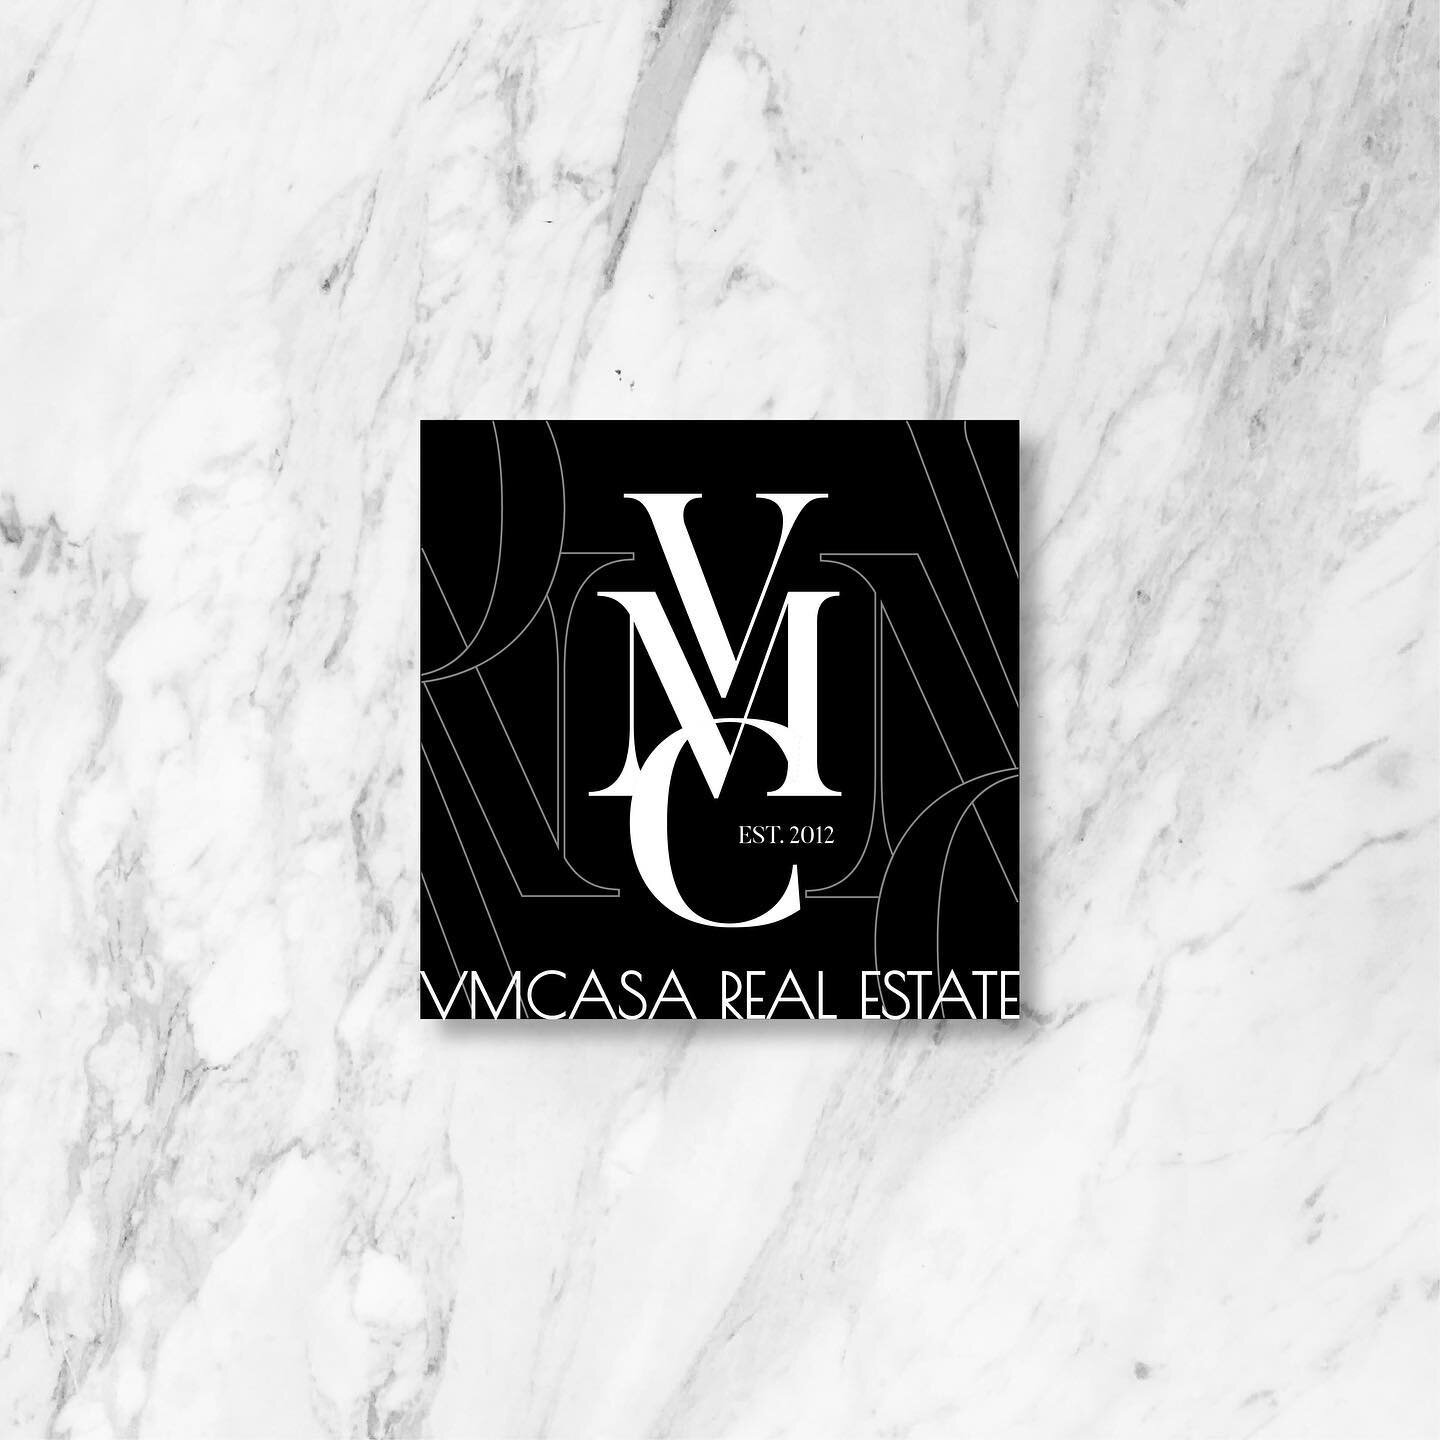 VMCASA was founded in 2012 by our experienced and lovely @vivianamaddo .
With a fresh new look and feel of the brand, we strive to create possibilities in and around NYC for investors and life-makers. We think outside the box, find value that is a ge